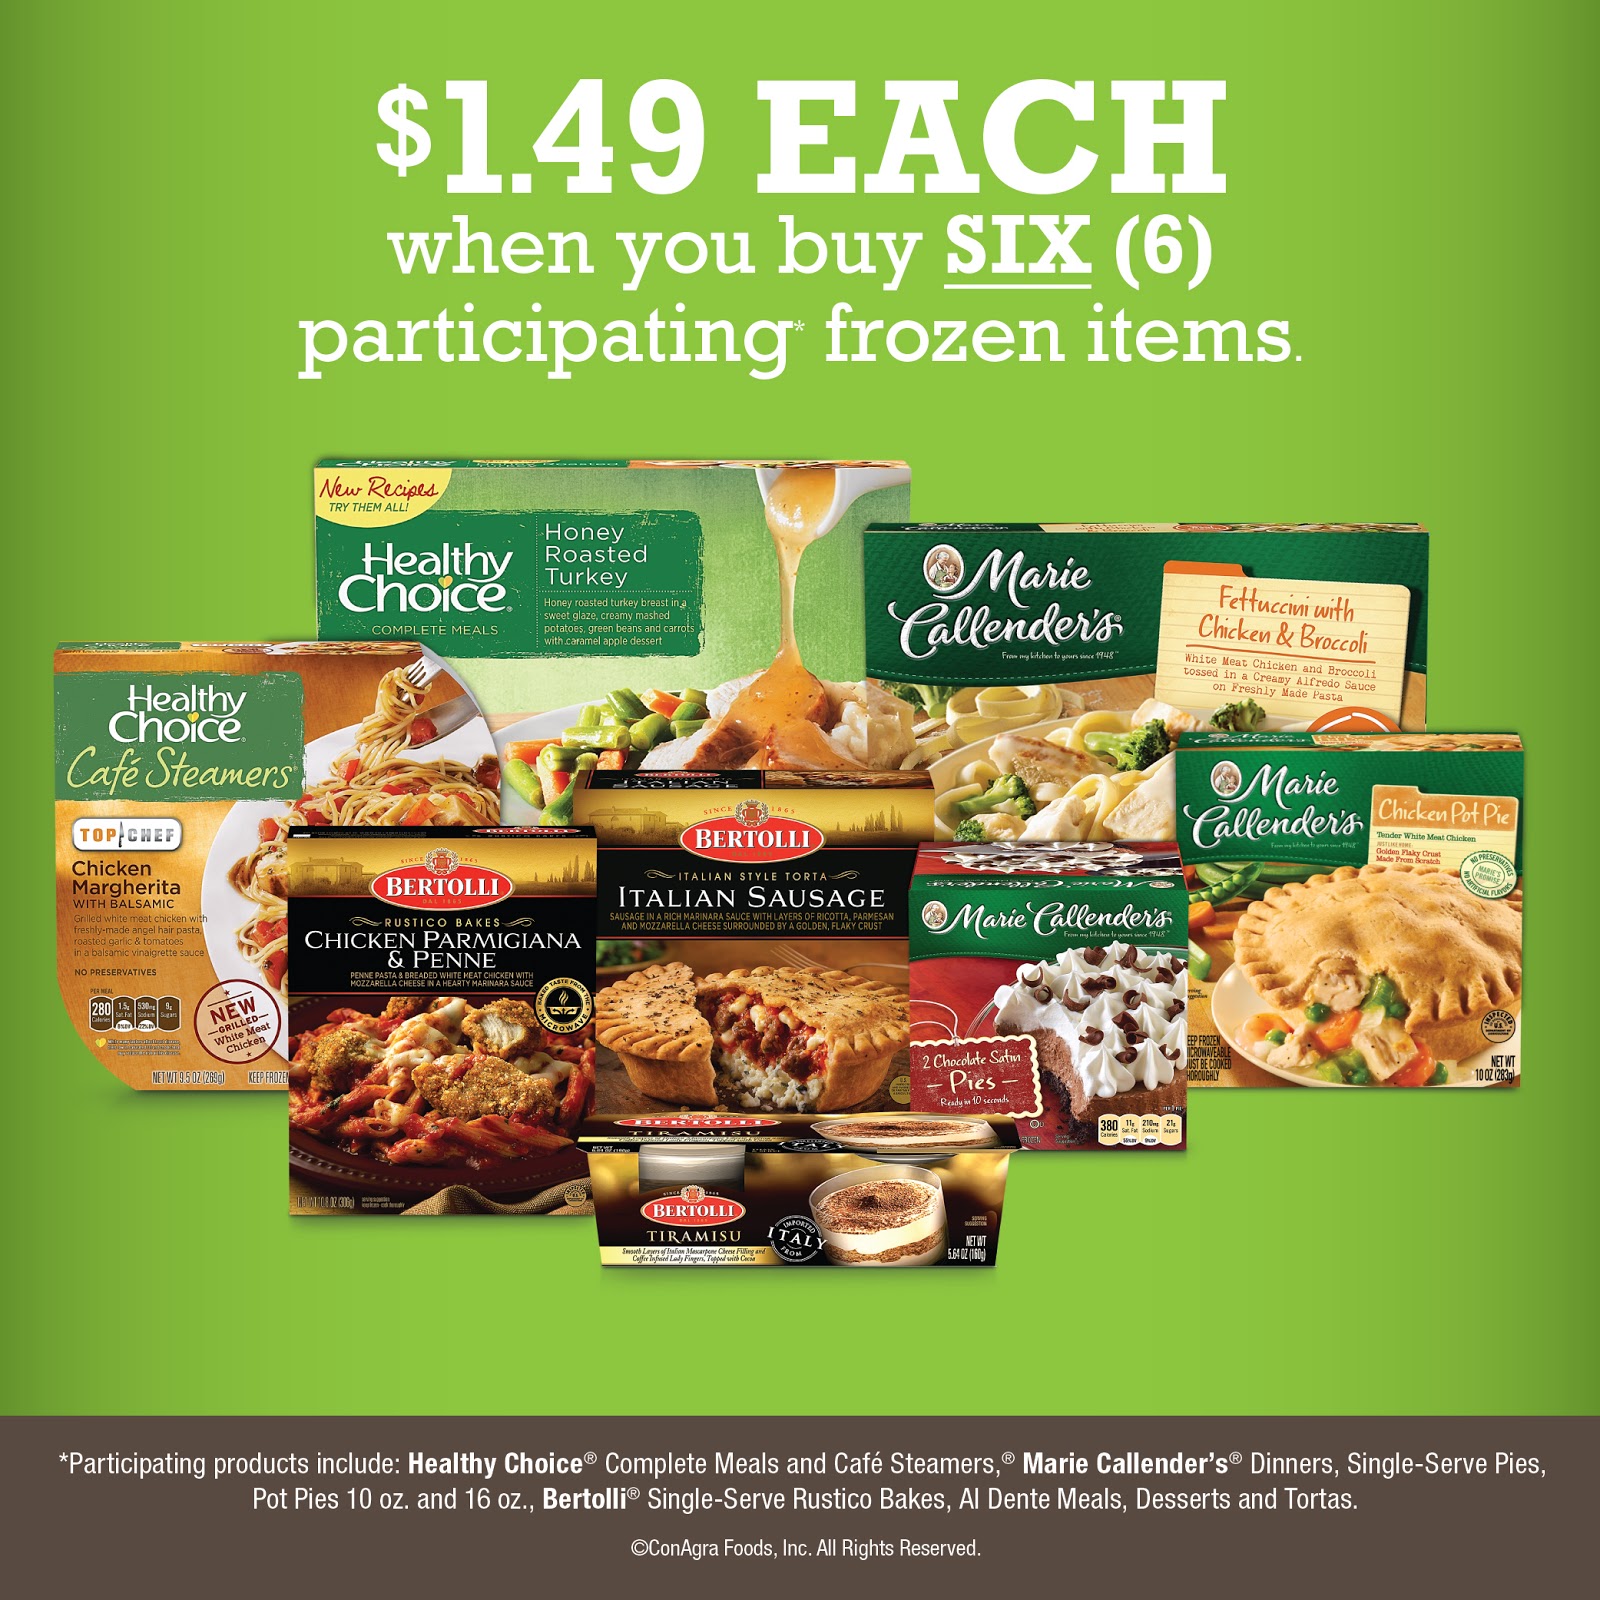  Buy 6 Frozen Meals & the Price Drops to $1.49 Each 